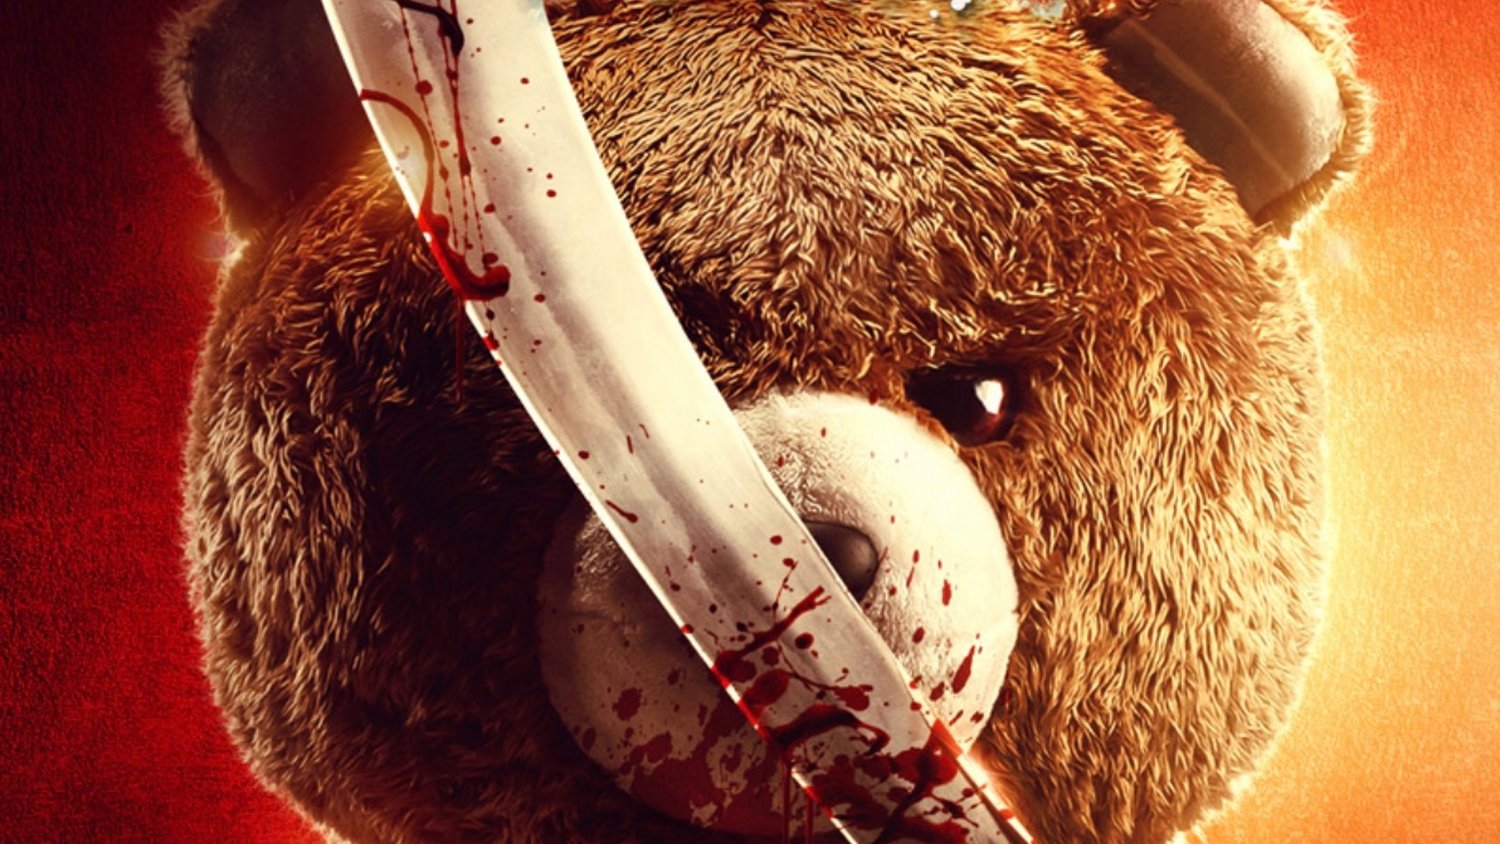 TED Meets TERRIFIER in Trailer For The Campy Thailand Horror Film NIGHT OF THE KILLER BEARS